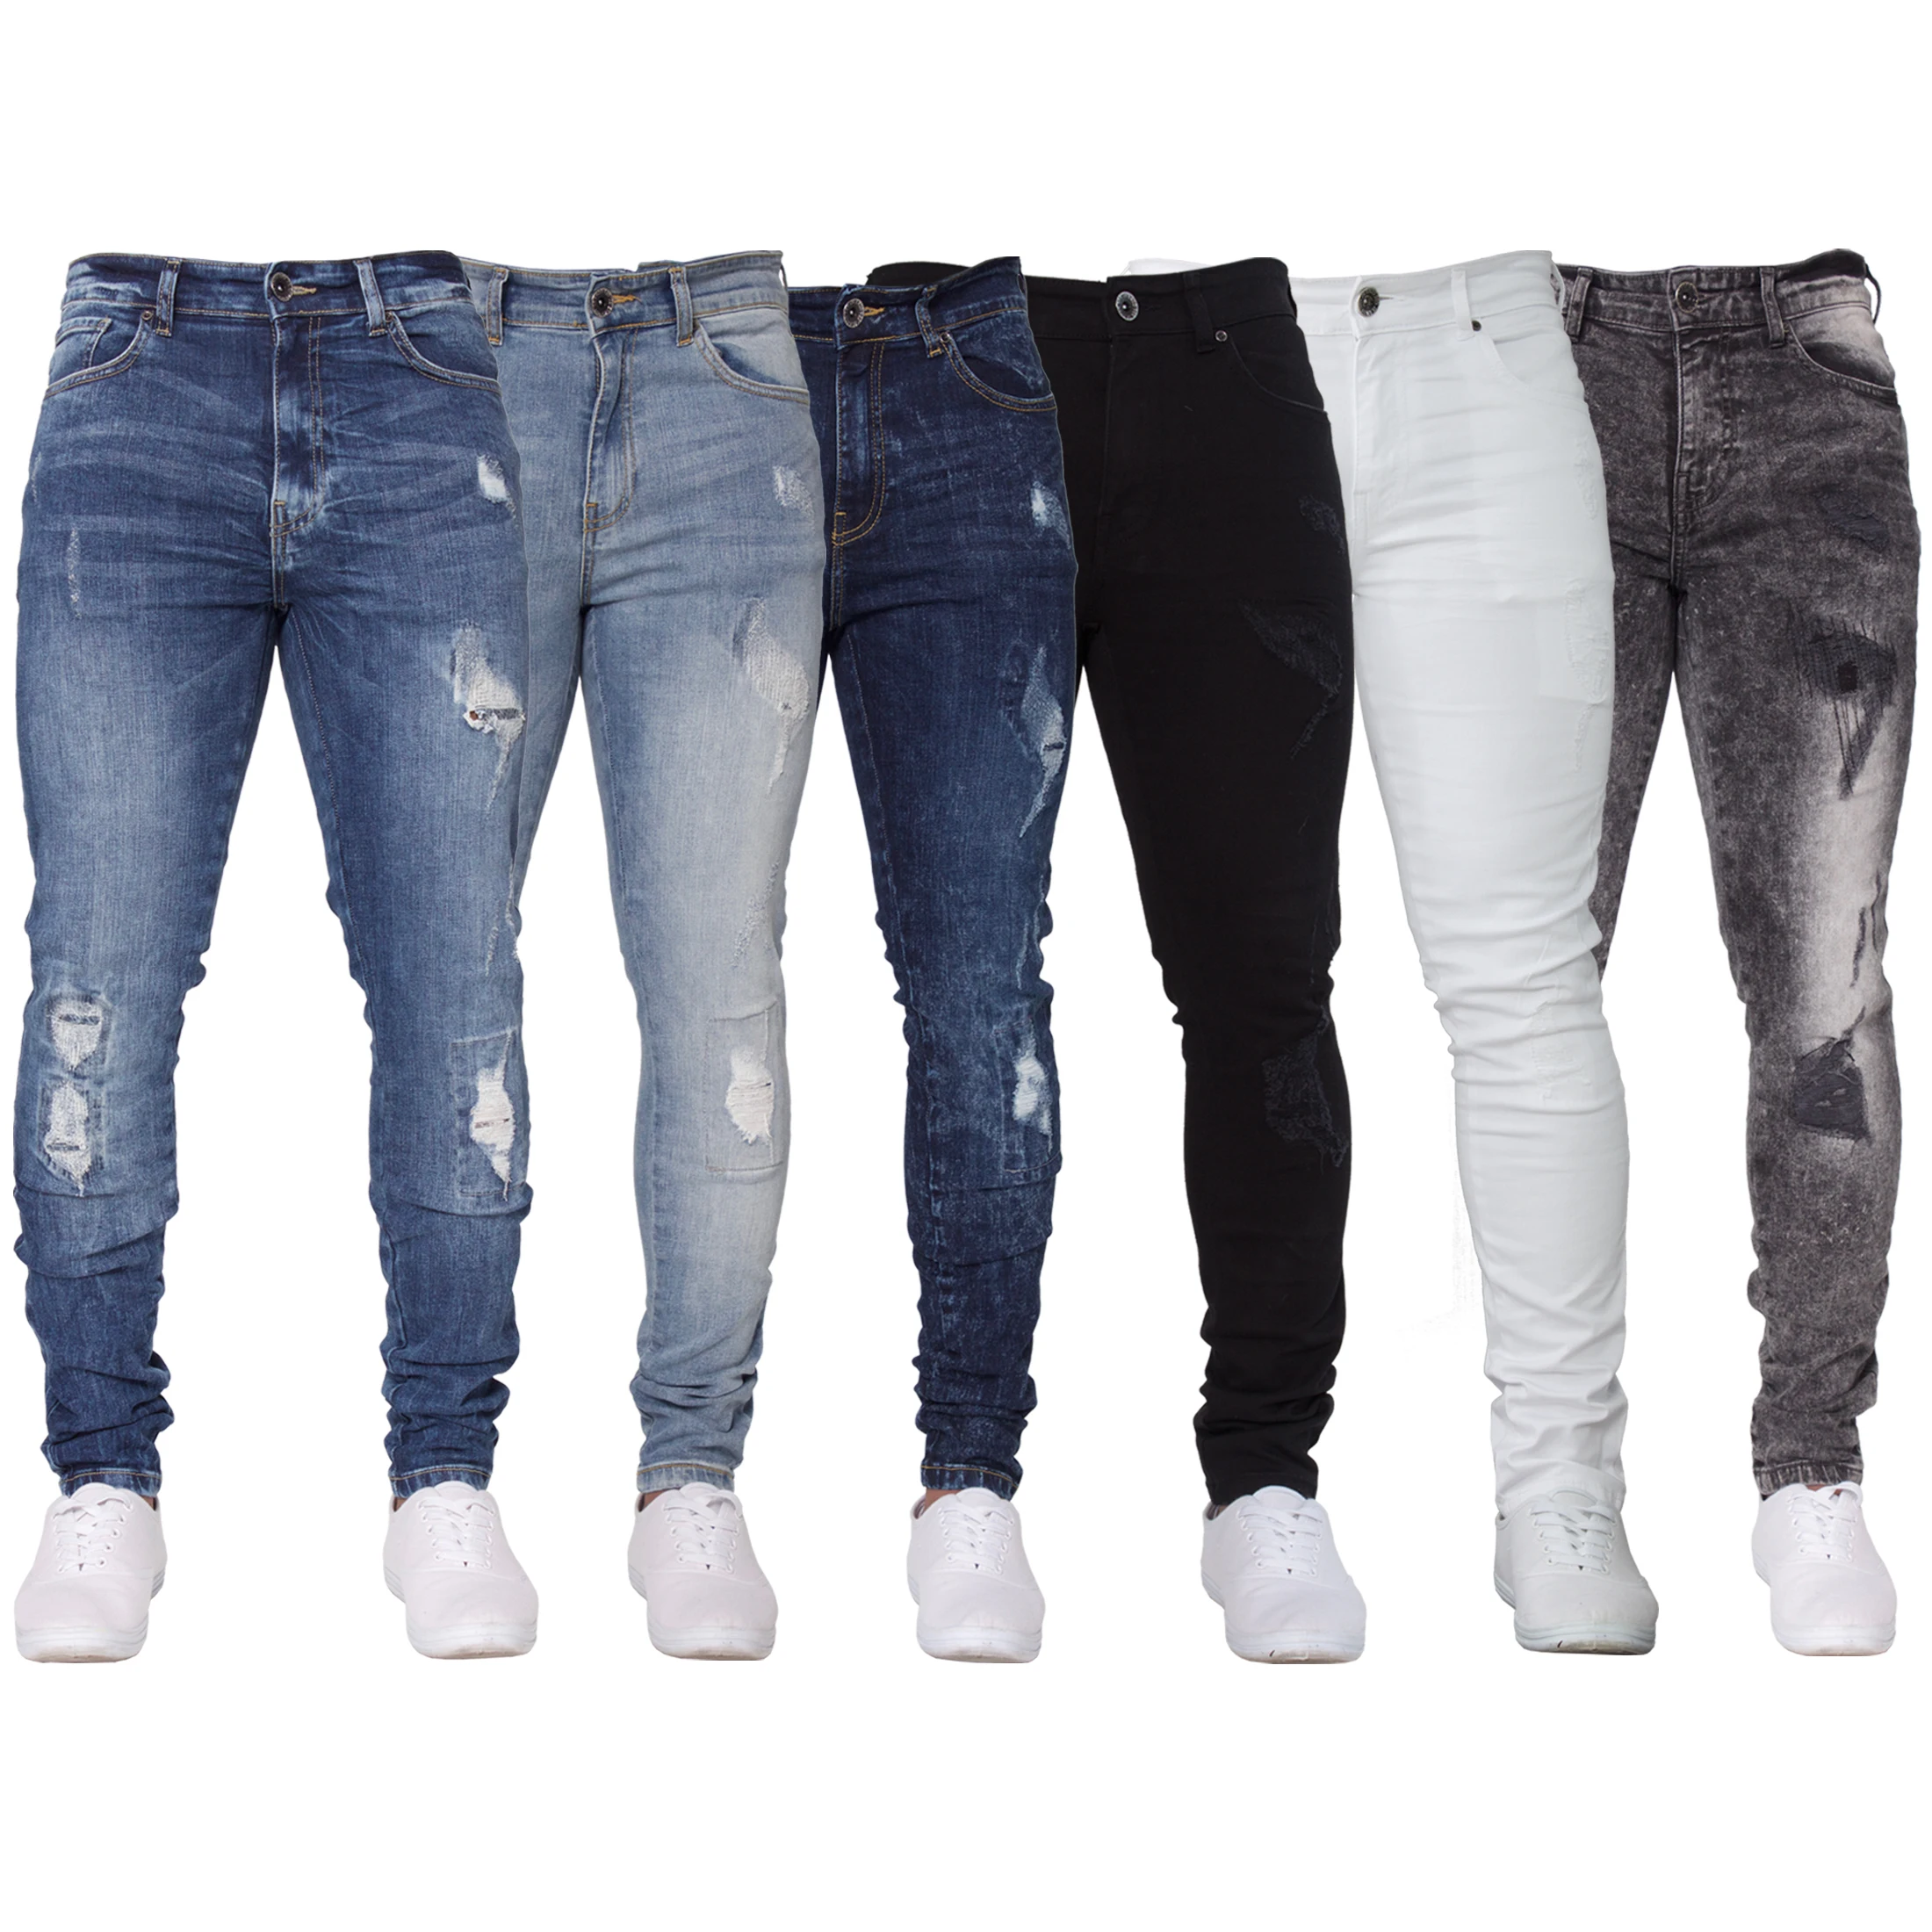 mr price jeans for guys